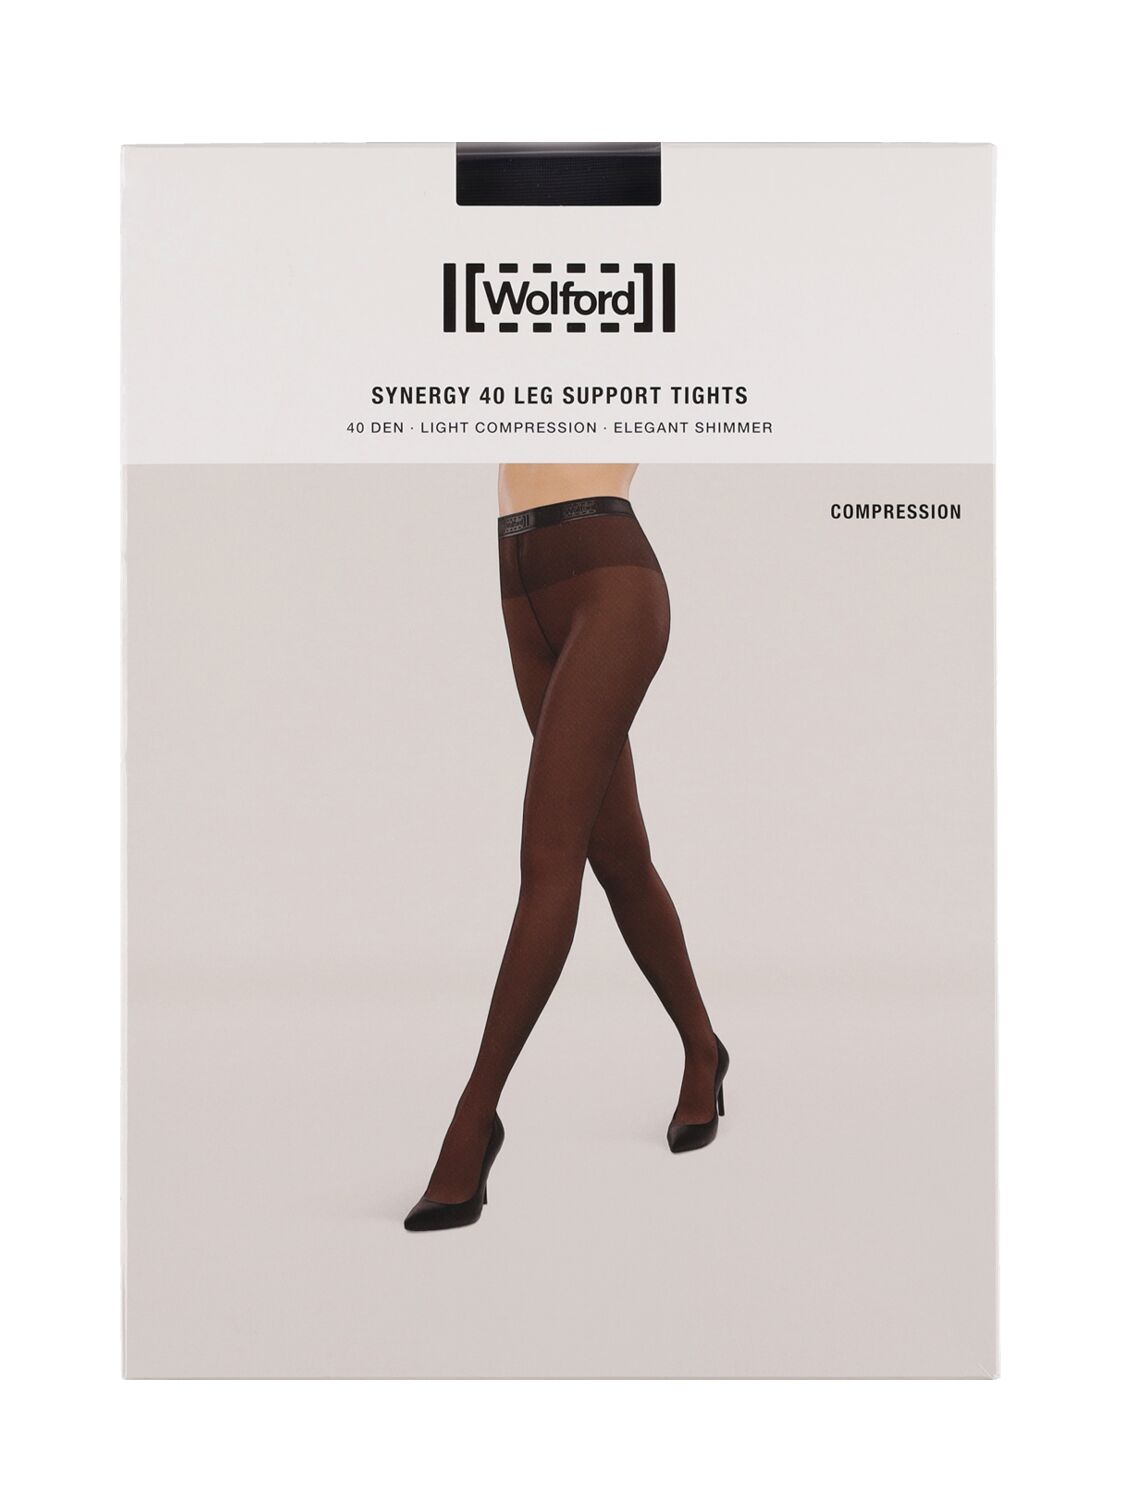 Wolford Synergy Leg Support Compression Tights - Black